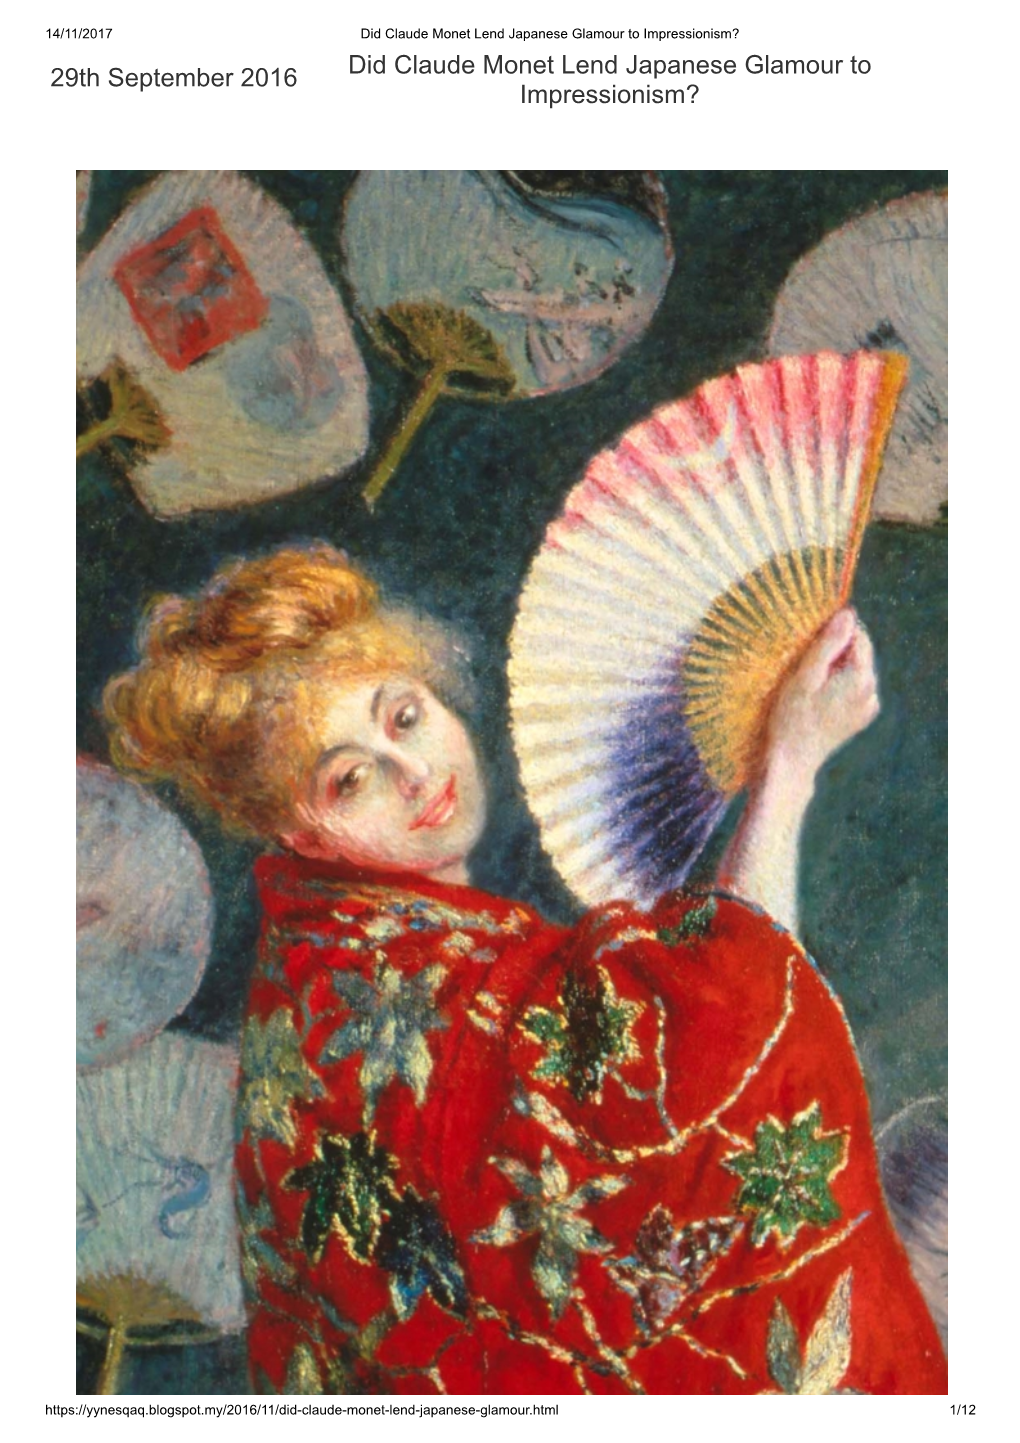 29Th September 2016 Did Claude Monet Lend Japanese Glamour To